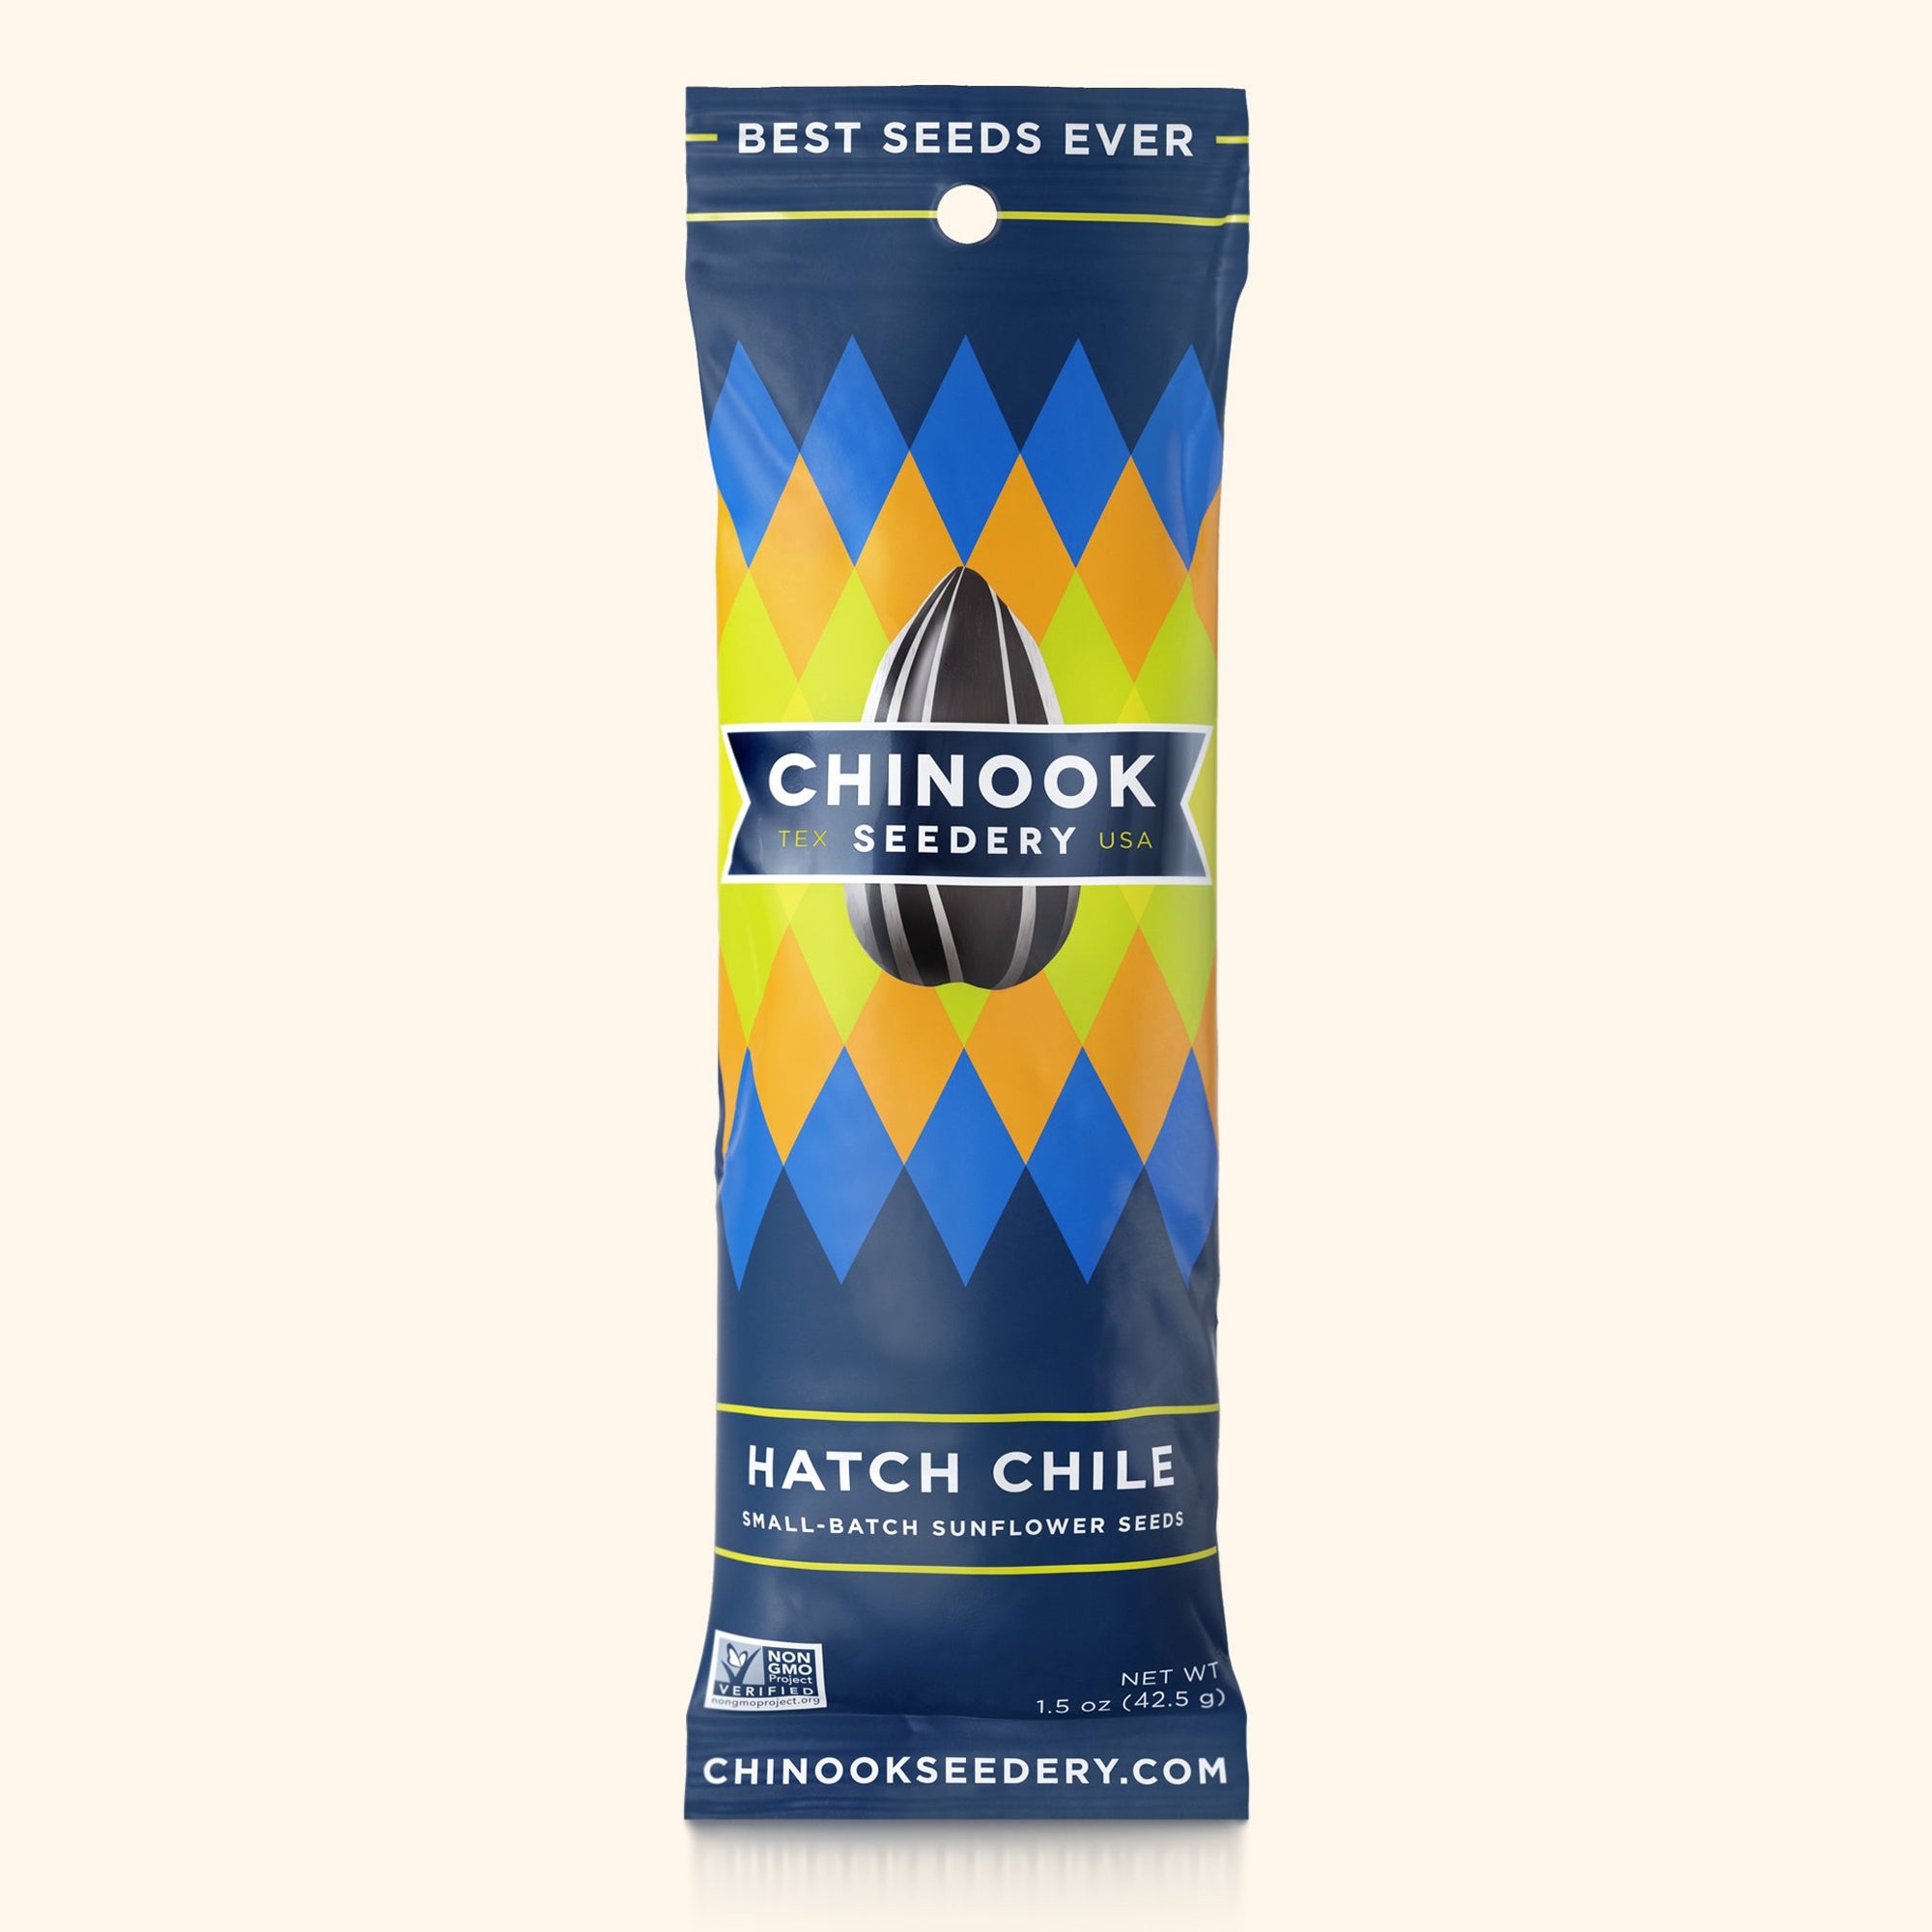 Hatch Chile - Single Serve 1.5 Ounce Trial Size Bag Chinook Seedery 36 count case 